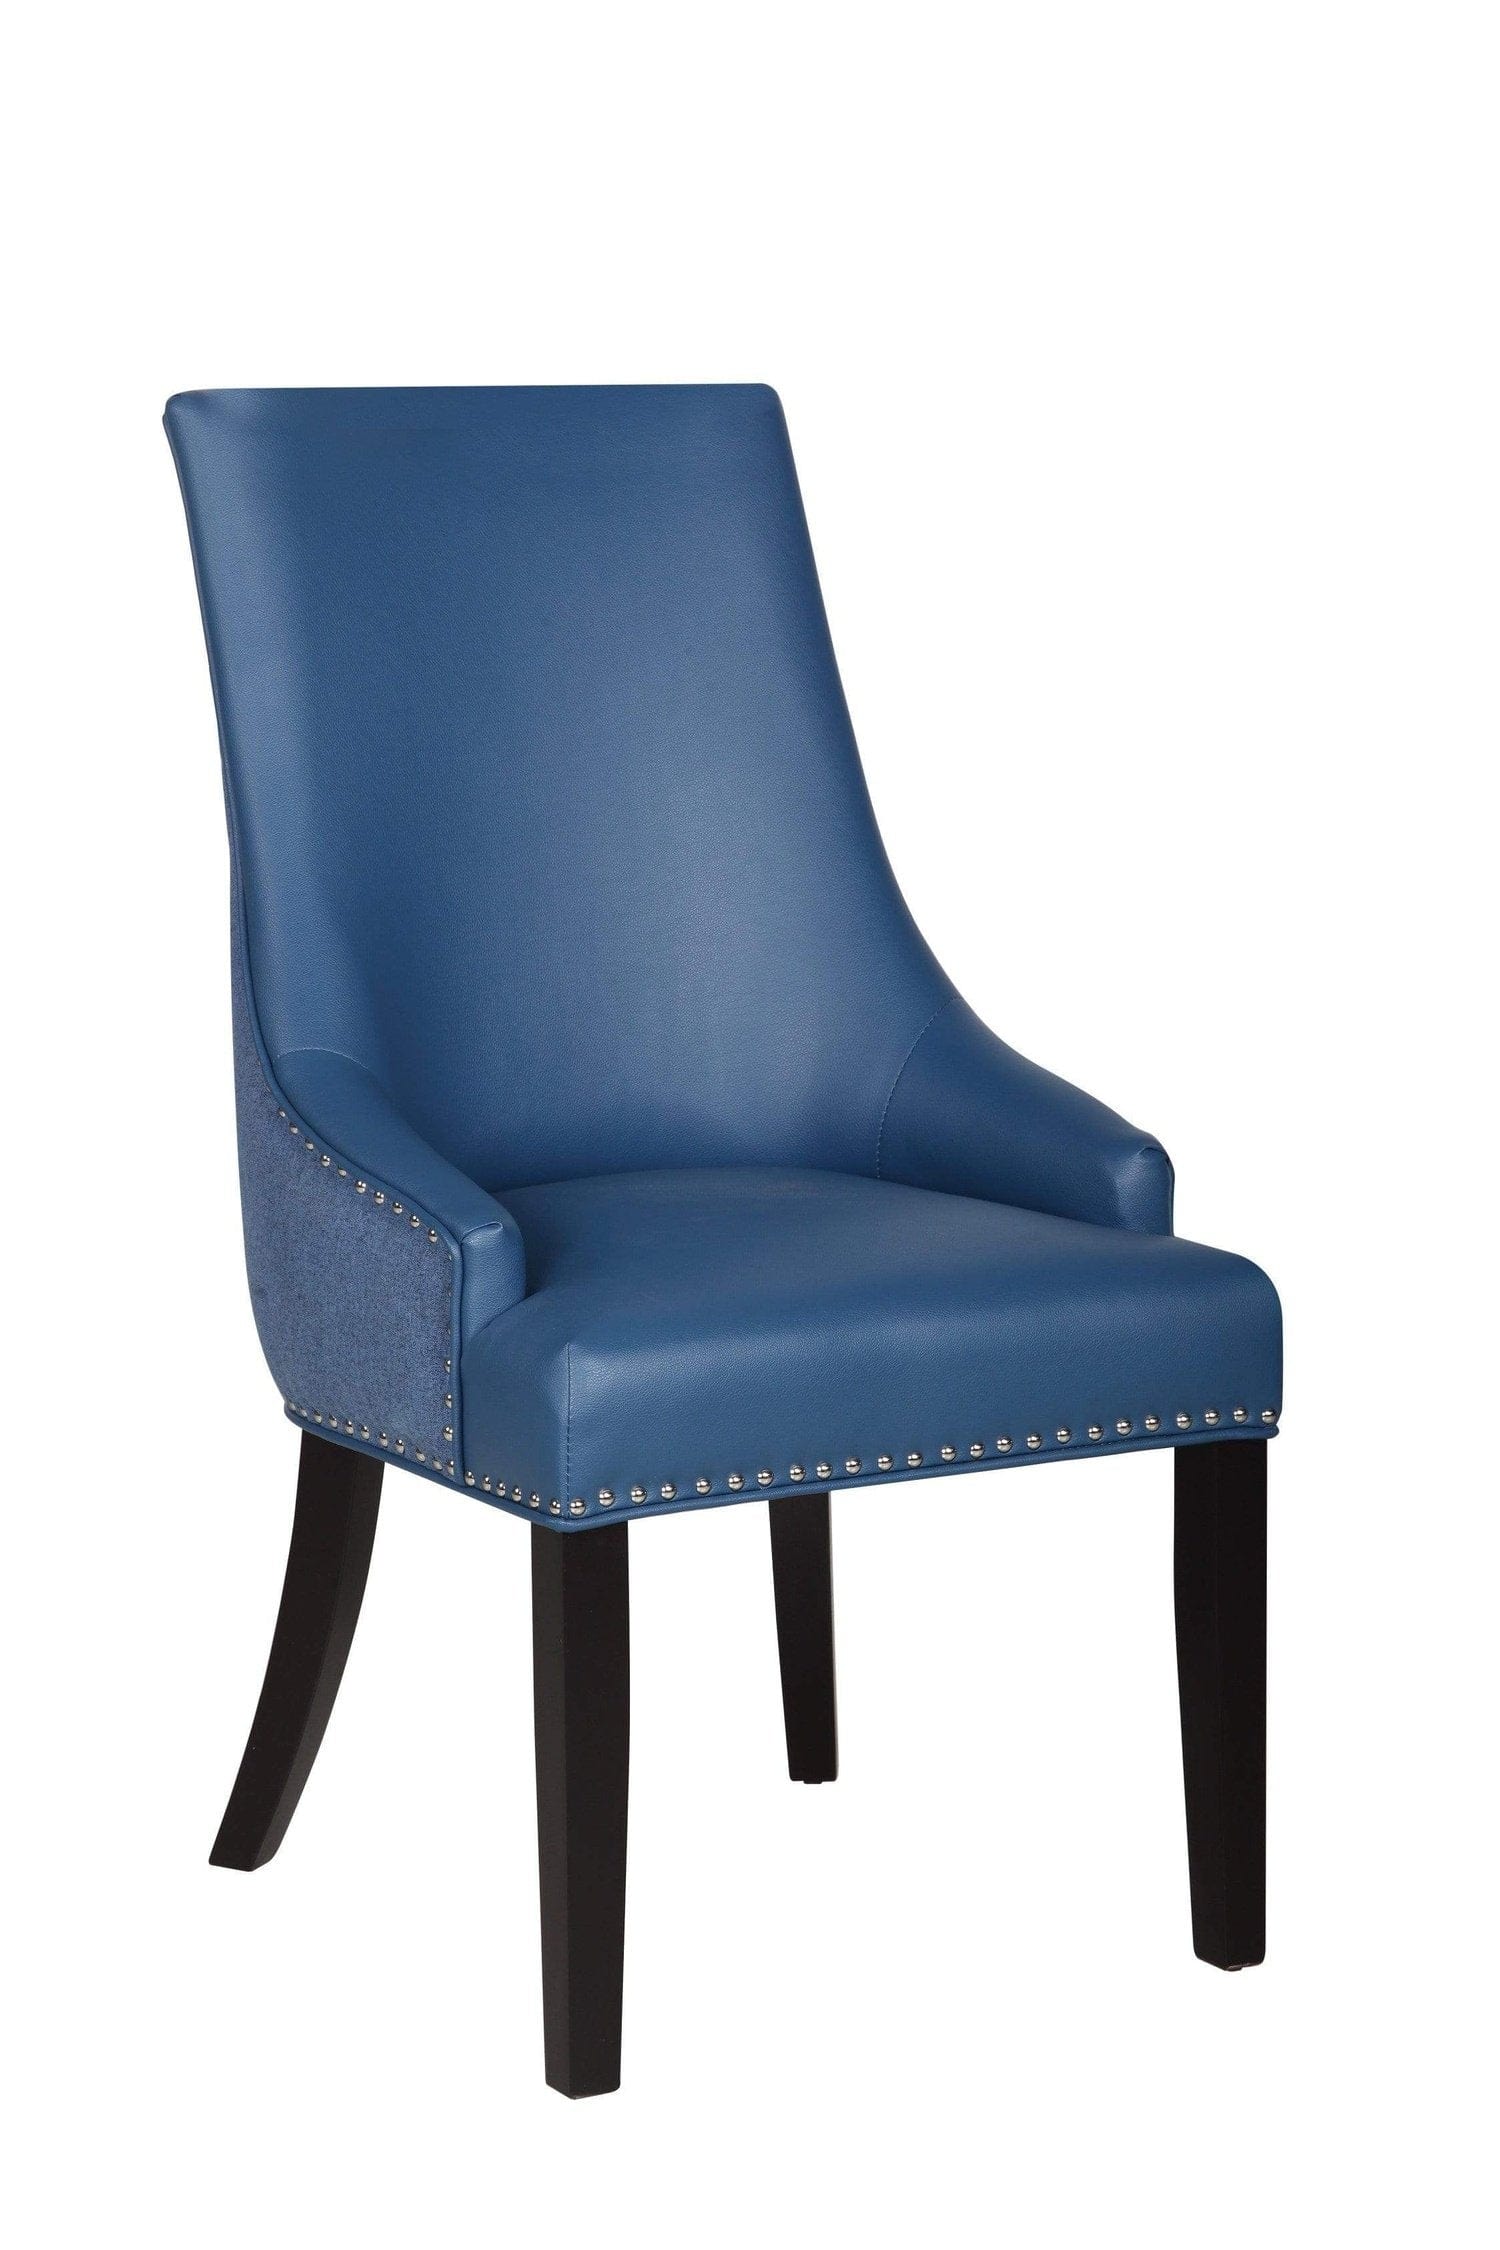 https://www.chichome.com/cdn/shop/products/iconic-home-brando-dining-chair-pu-leather-linen-upholstery-nailhead-trim-wood-legs-set-of-2-4-658518.jpg?v=1693182820&width=2400